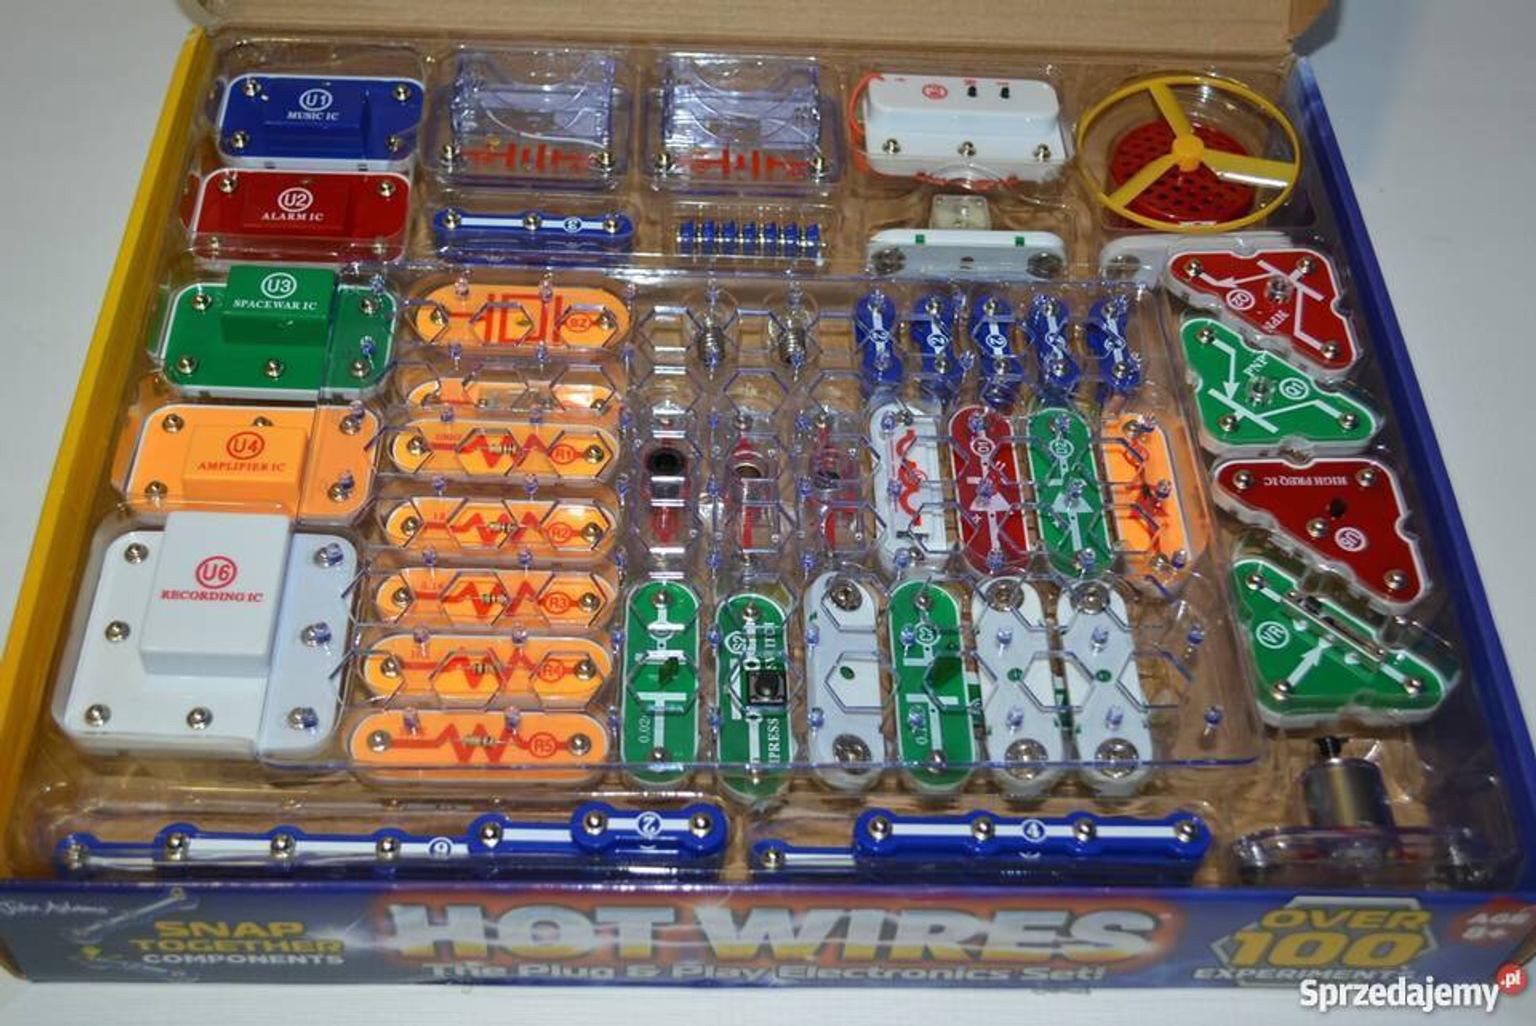 JOHN ADAMS HOT WIRES ELECTRONIC KIT EDUCATIONAL SCIENCE TOY 